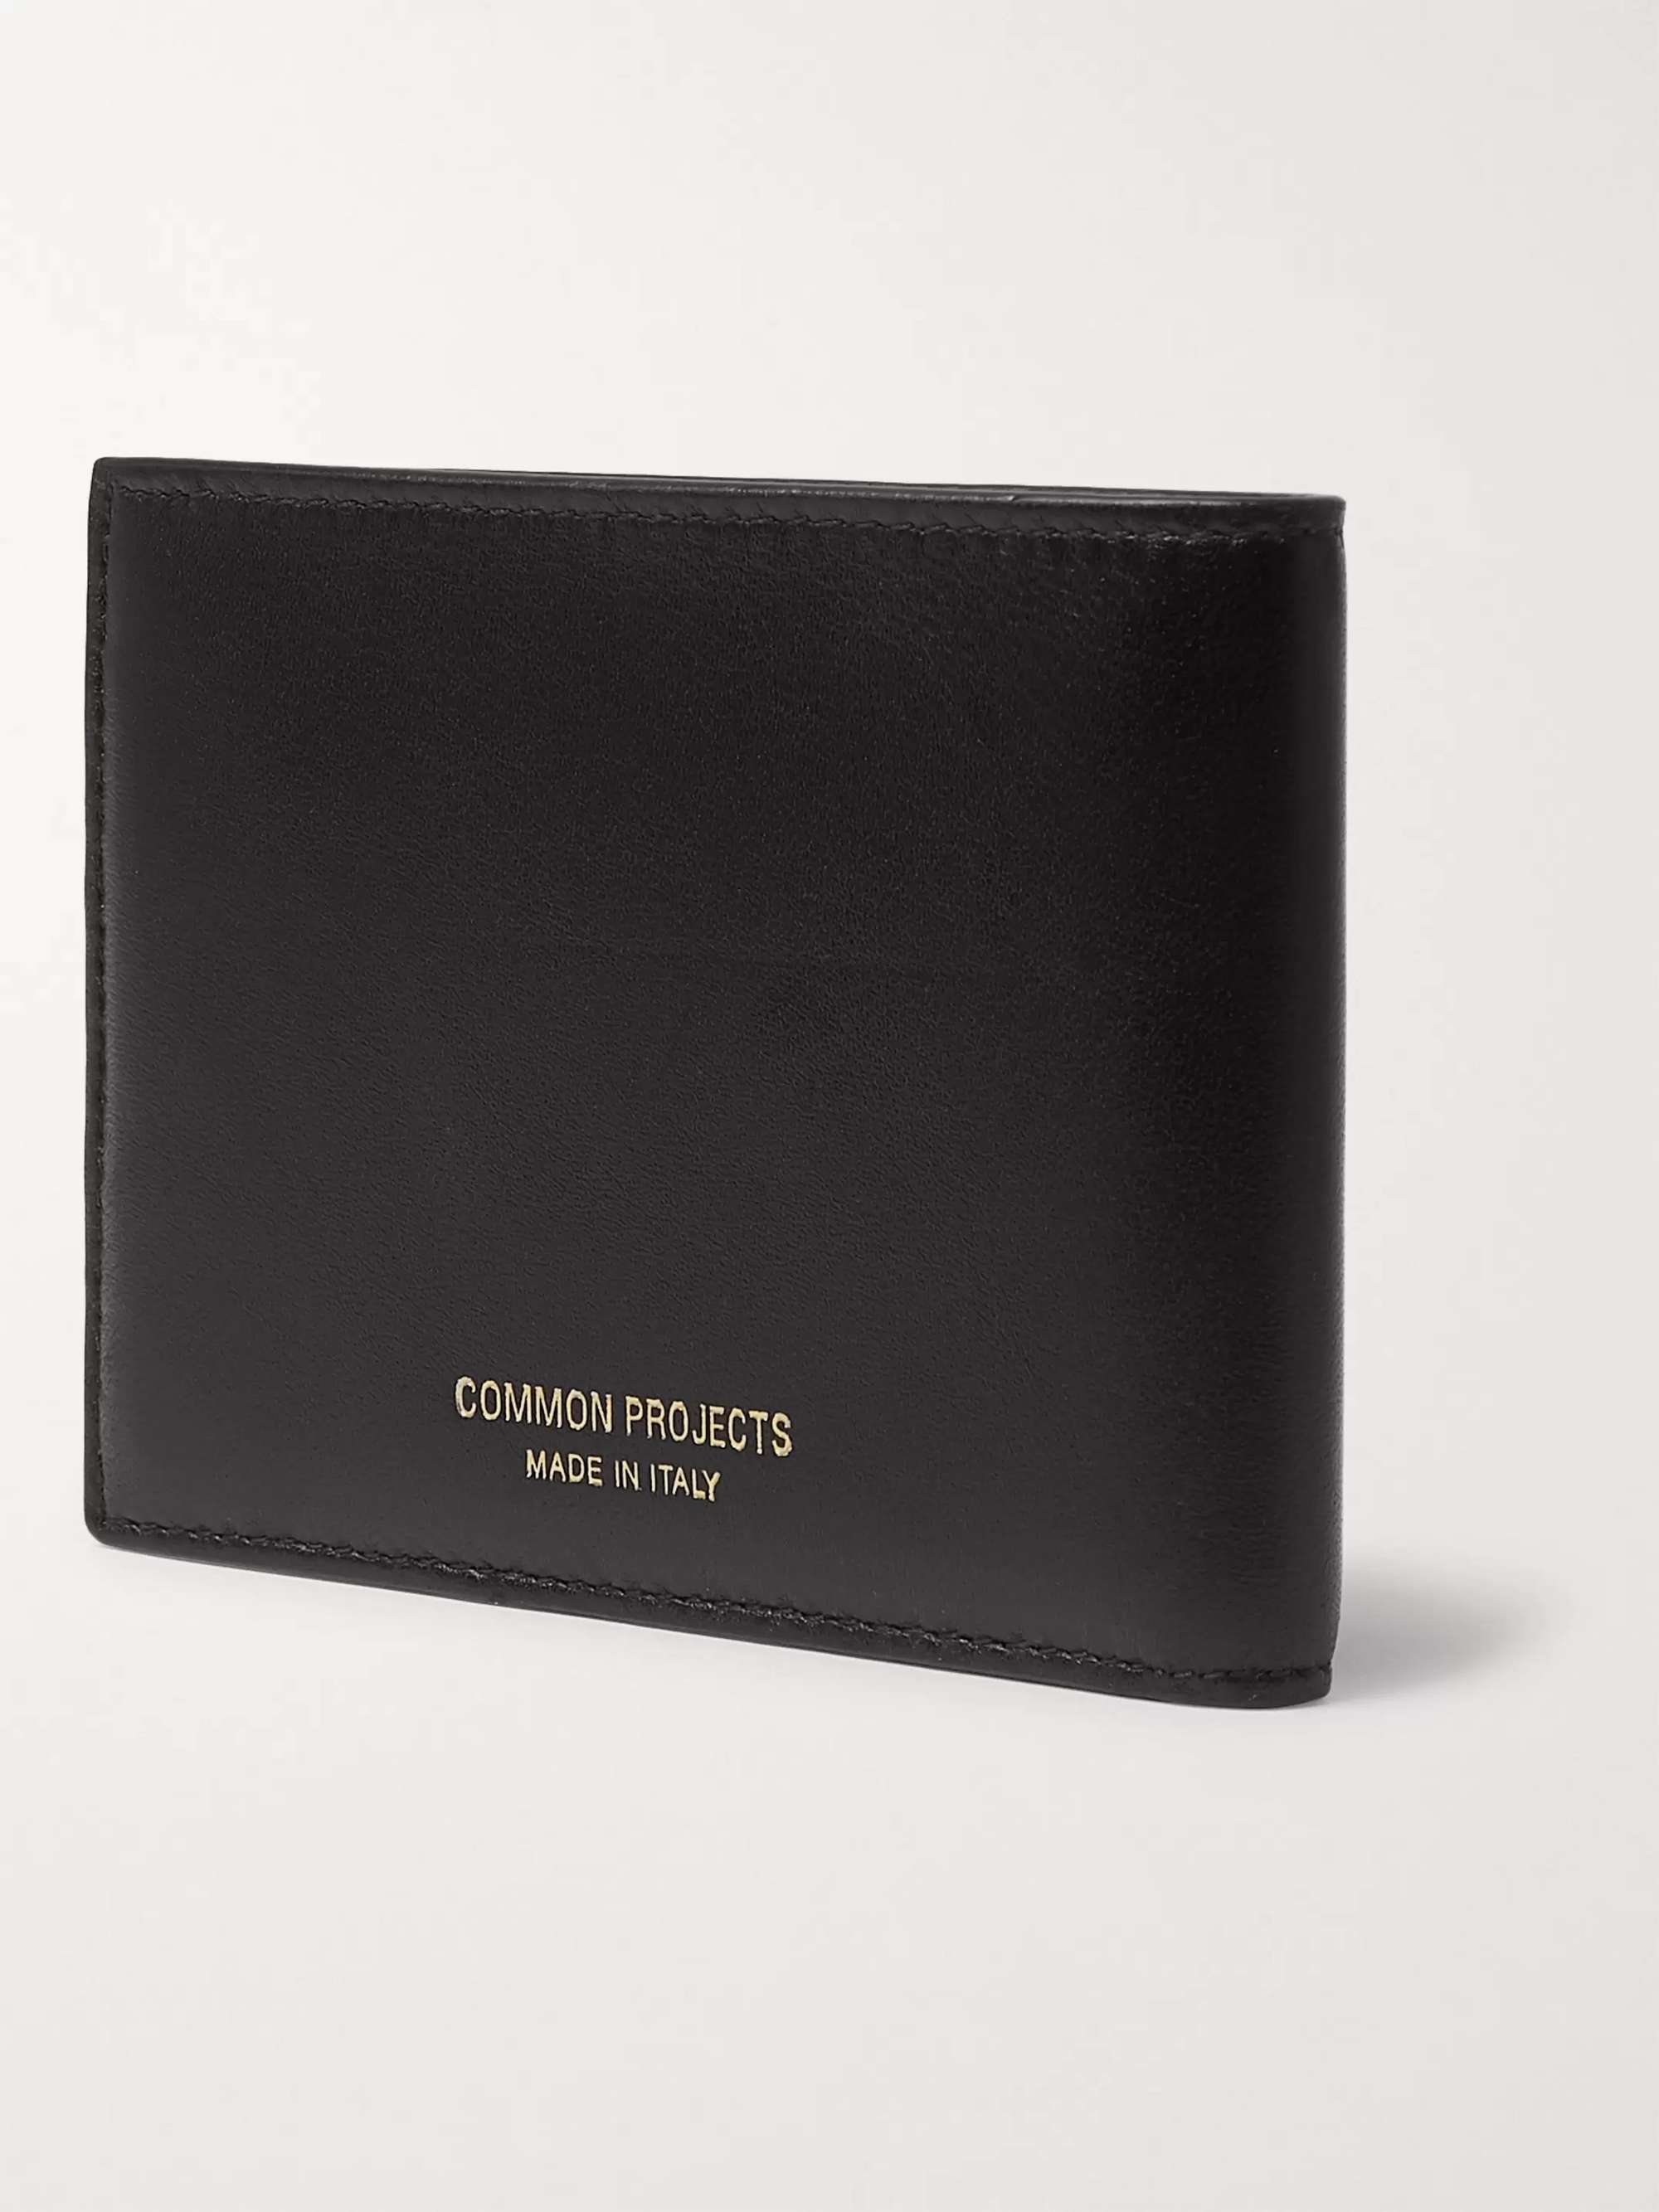 COMMON PROJECTS Full-Grain Leather Billfold Wallet